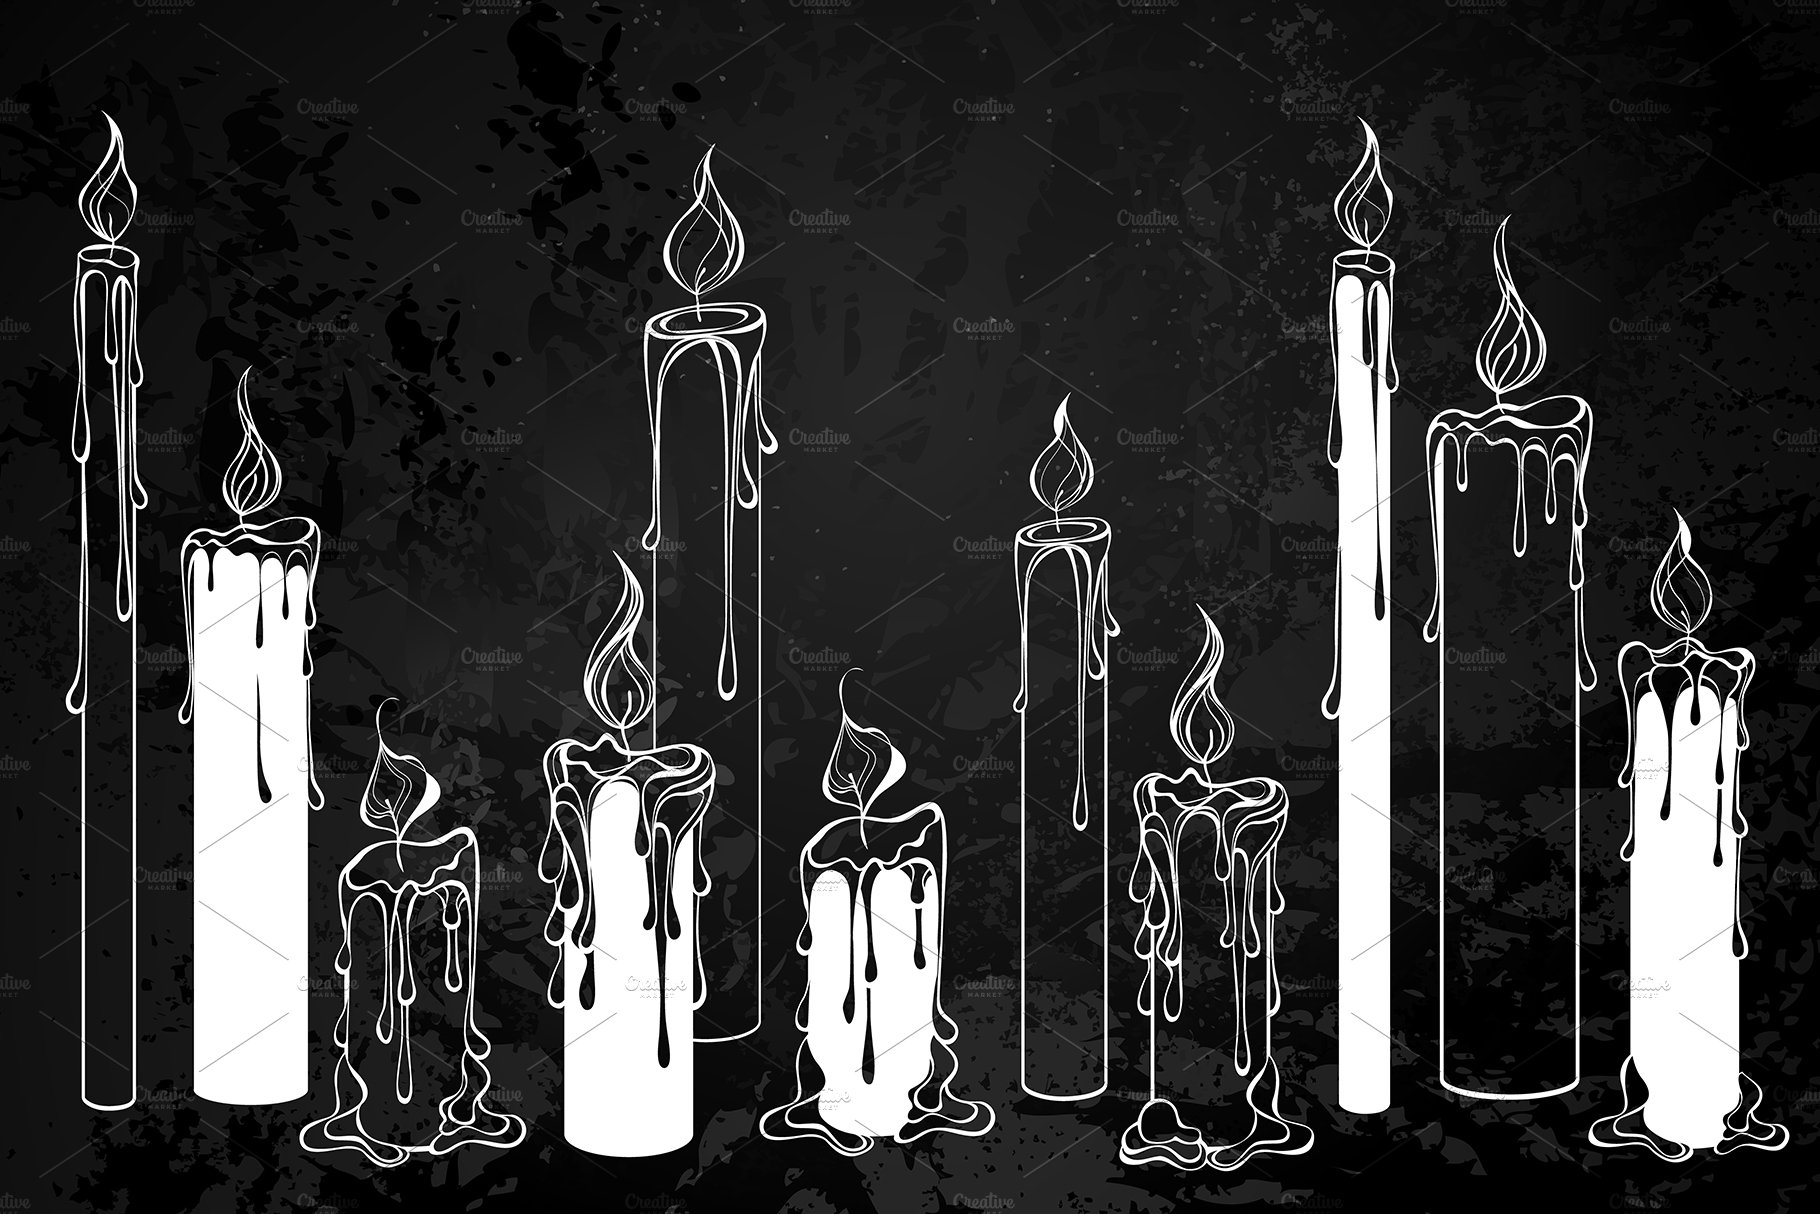 White Candles cover image.